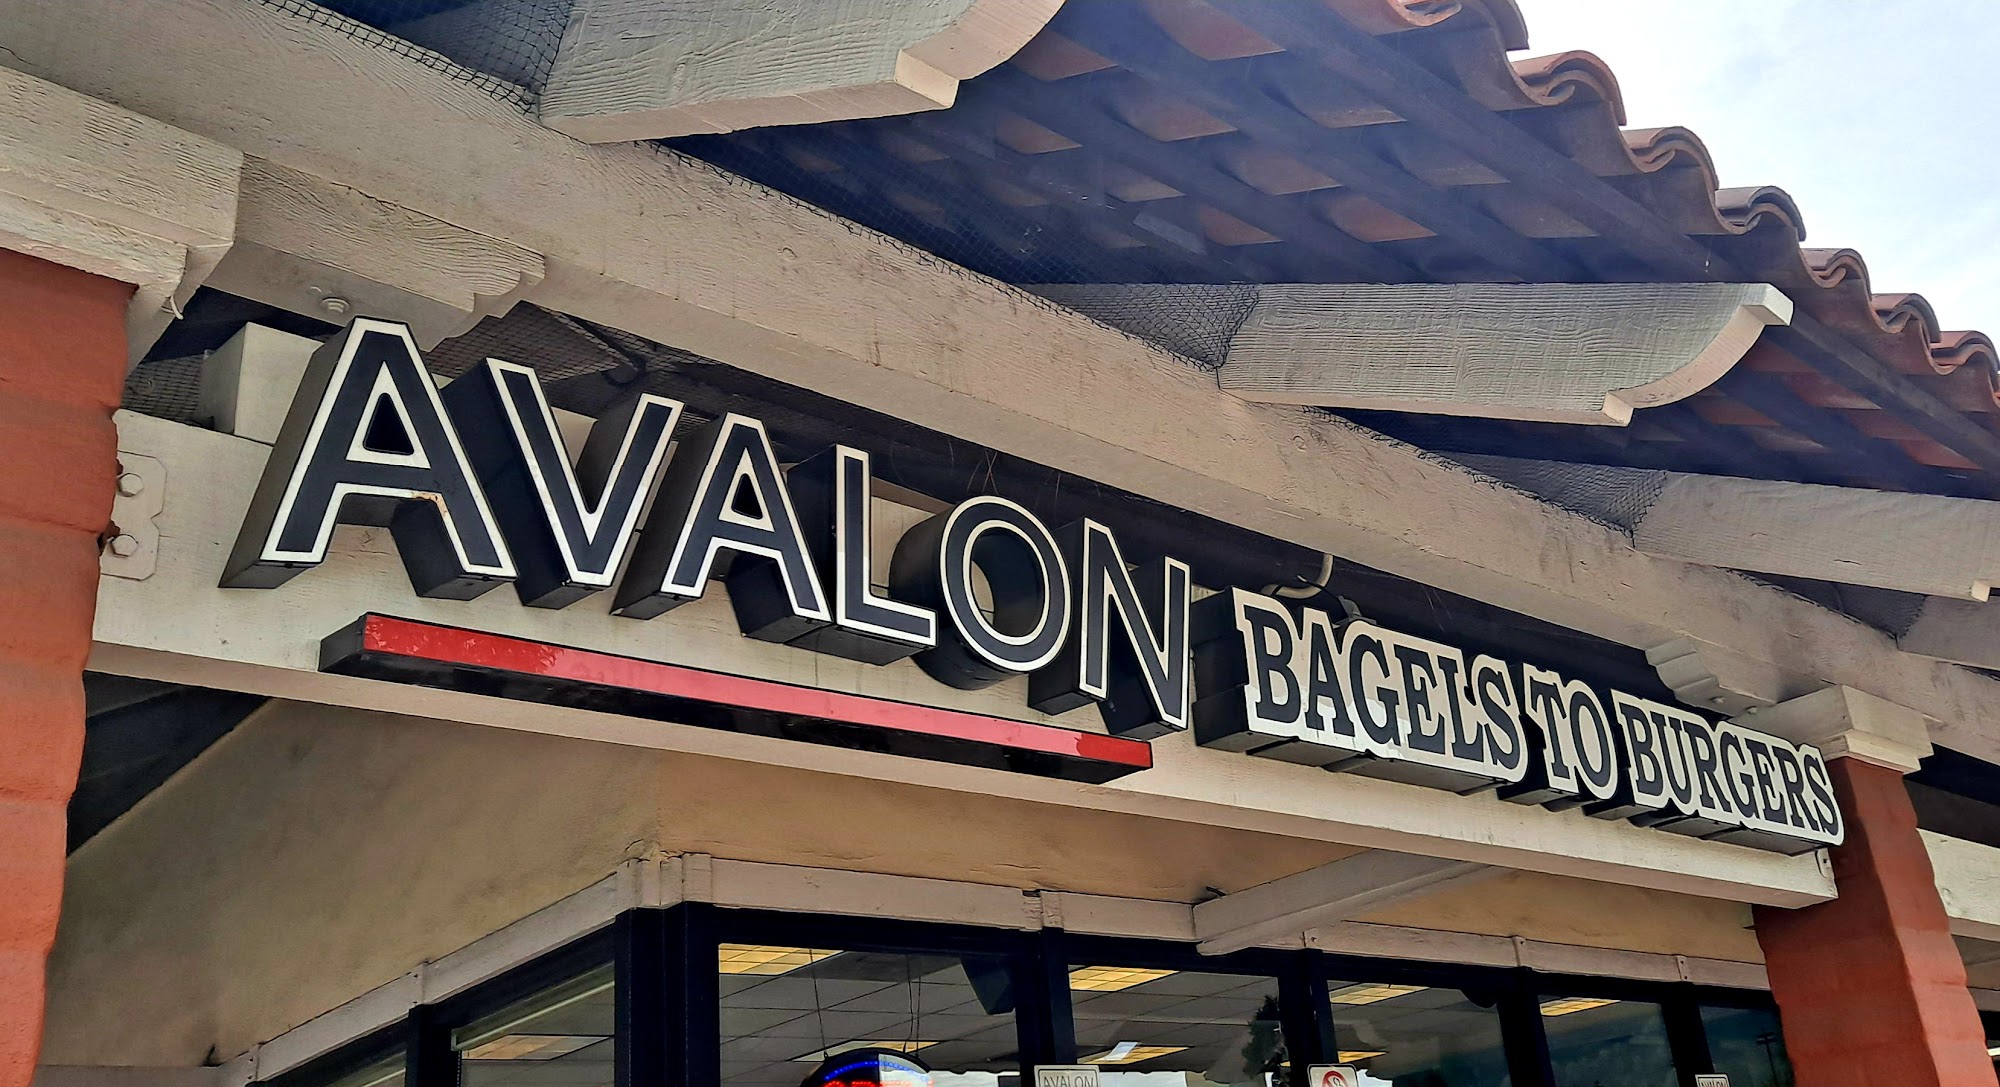 Avalon Bagels to Burgers